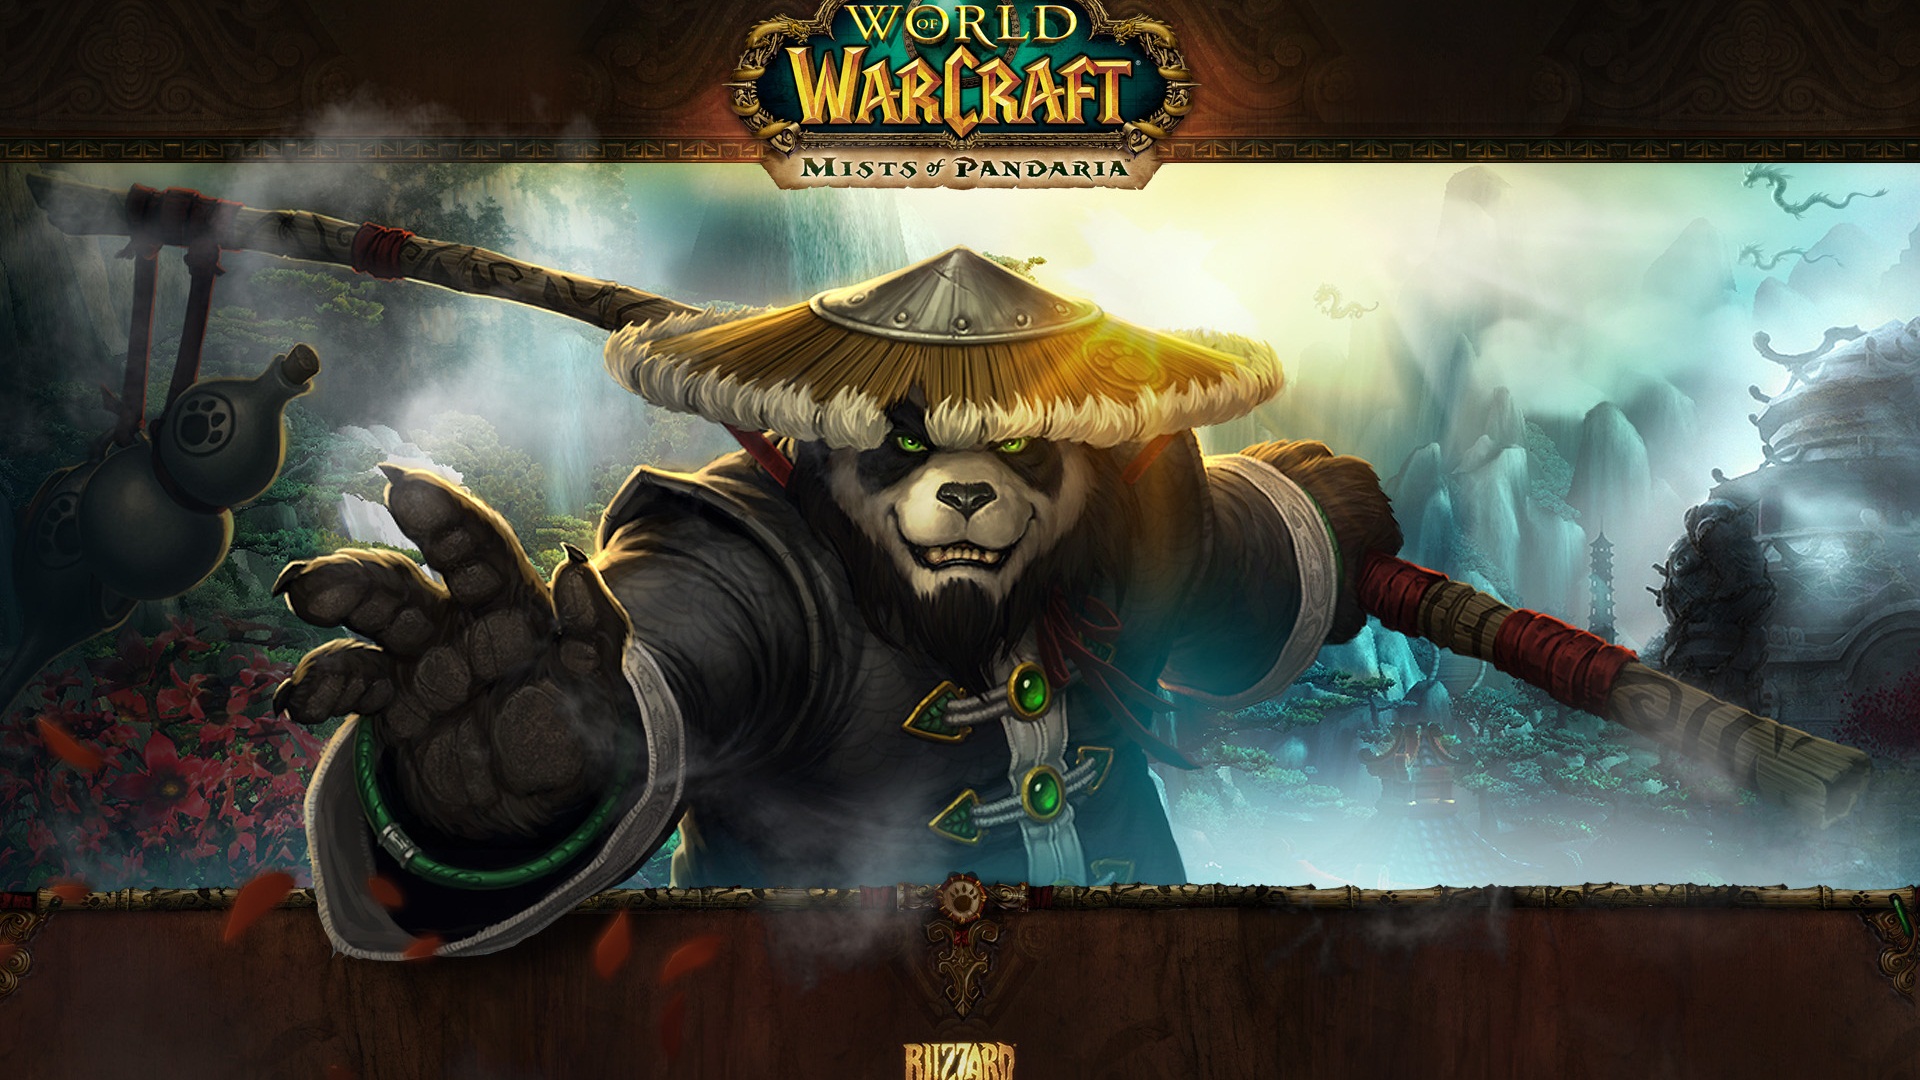 World of Warcraft: Mists of Pandaria HD wallpapers #1 - 1920x1080